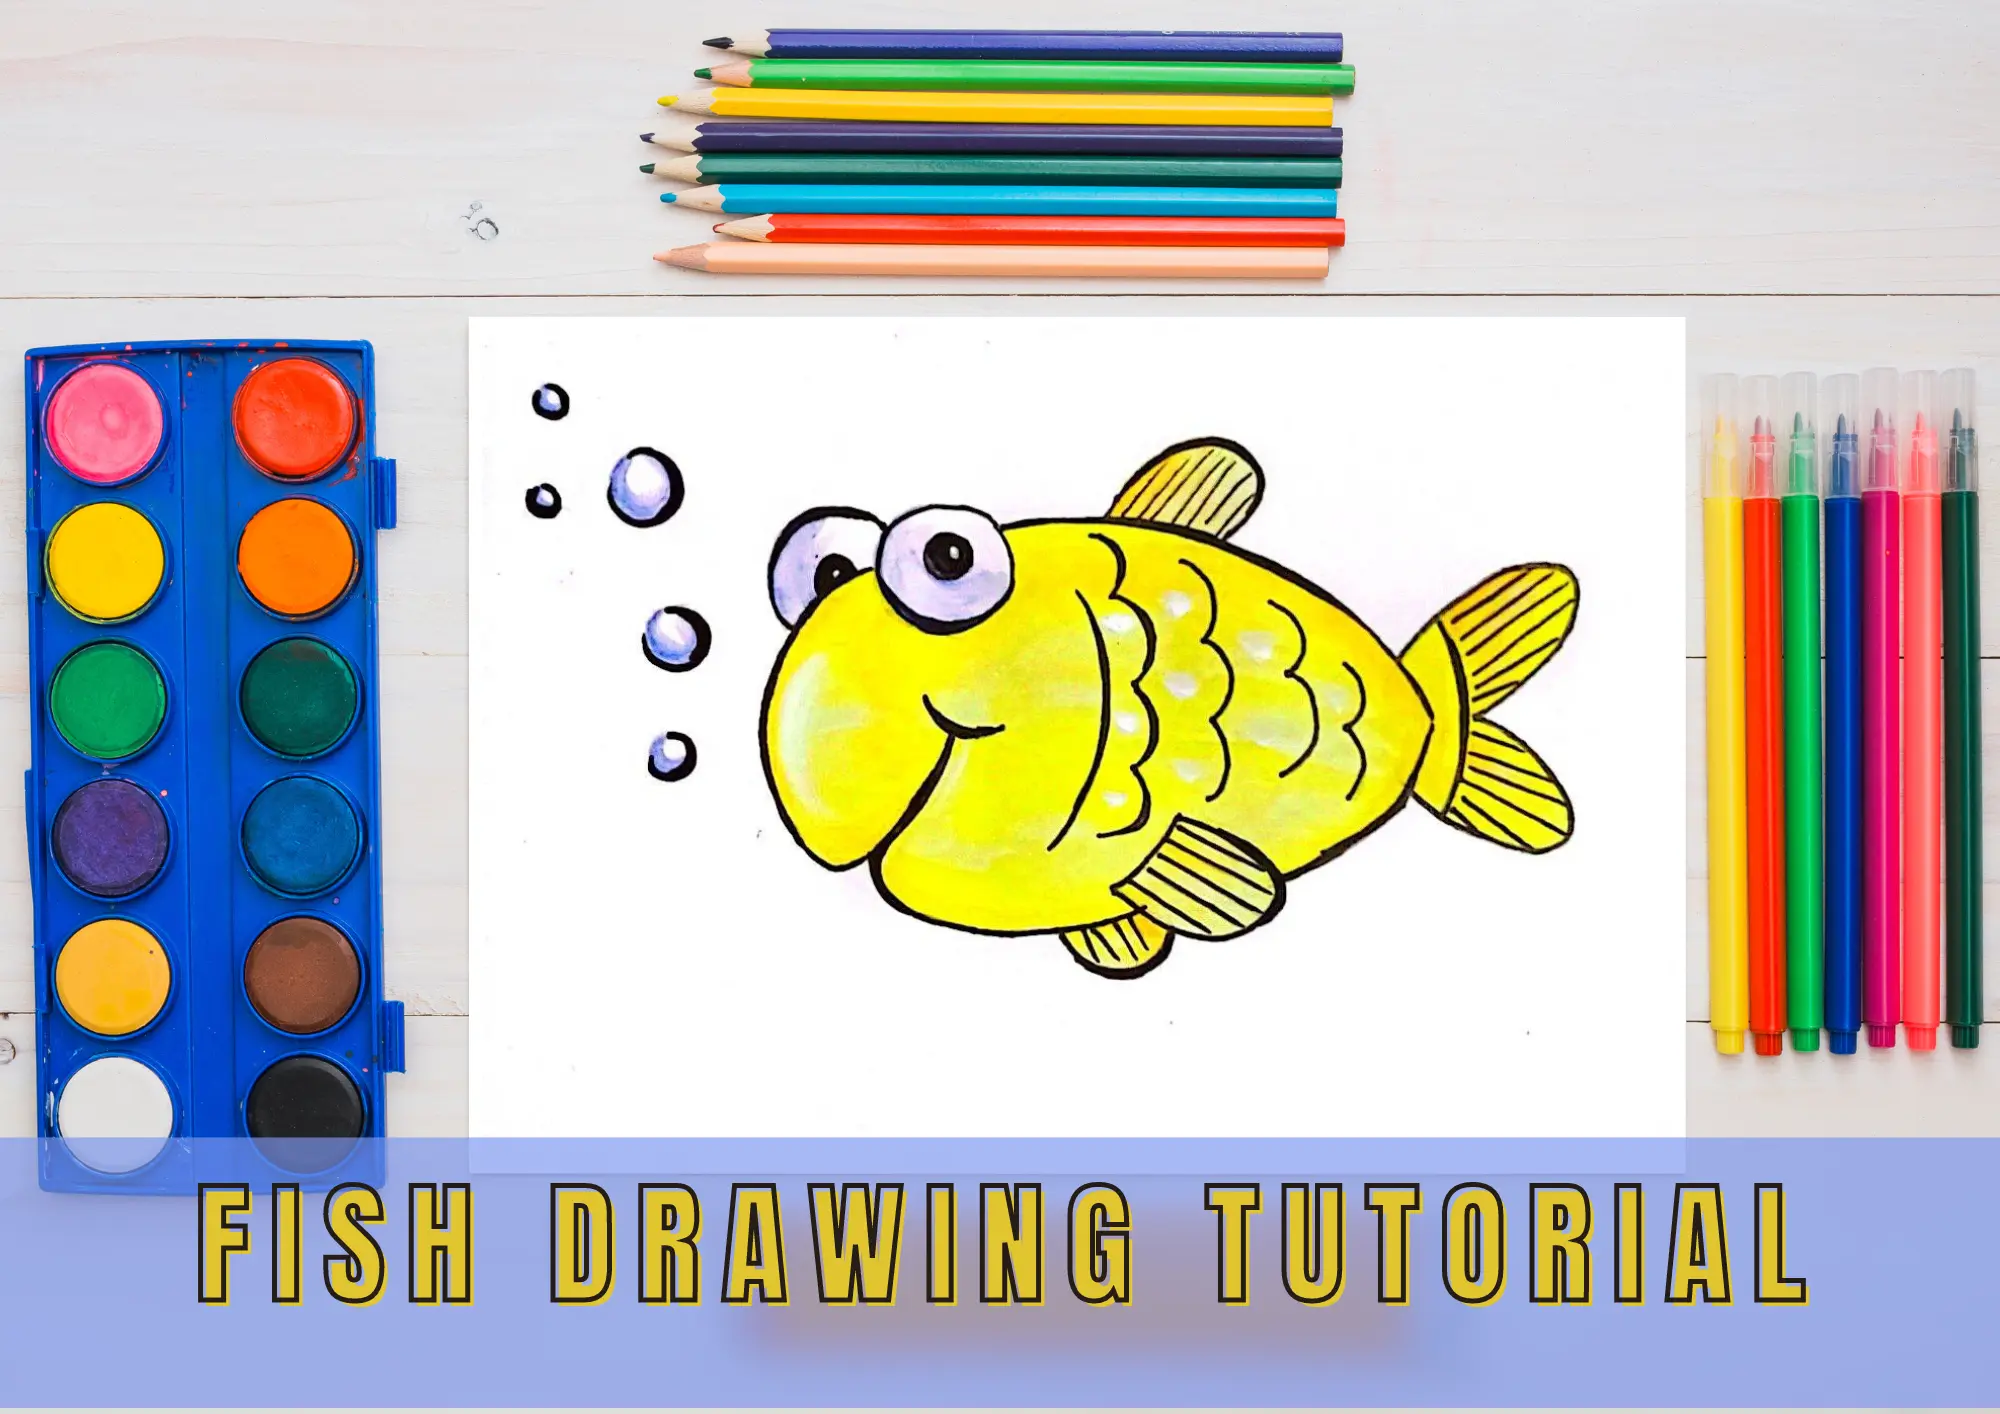 HOW TO DRAW A FISH (step by step)